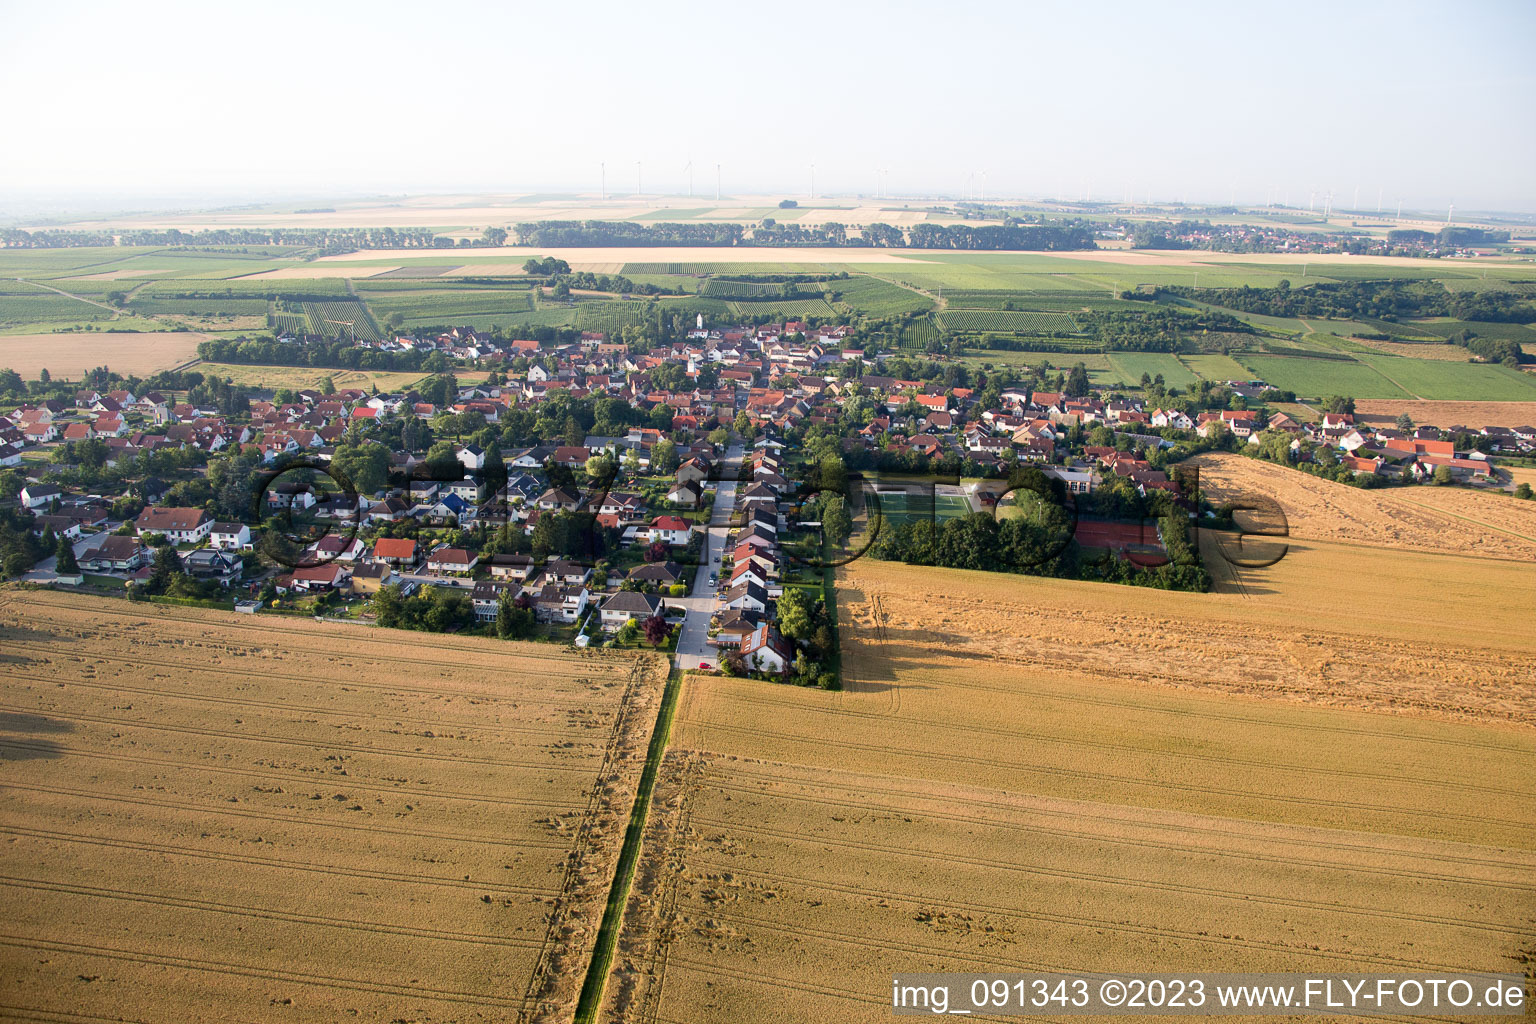 Dalheim in the state Rhineland-Palatinate, Germany out of the air